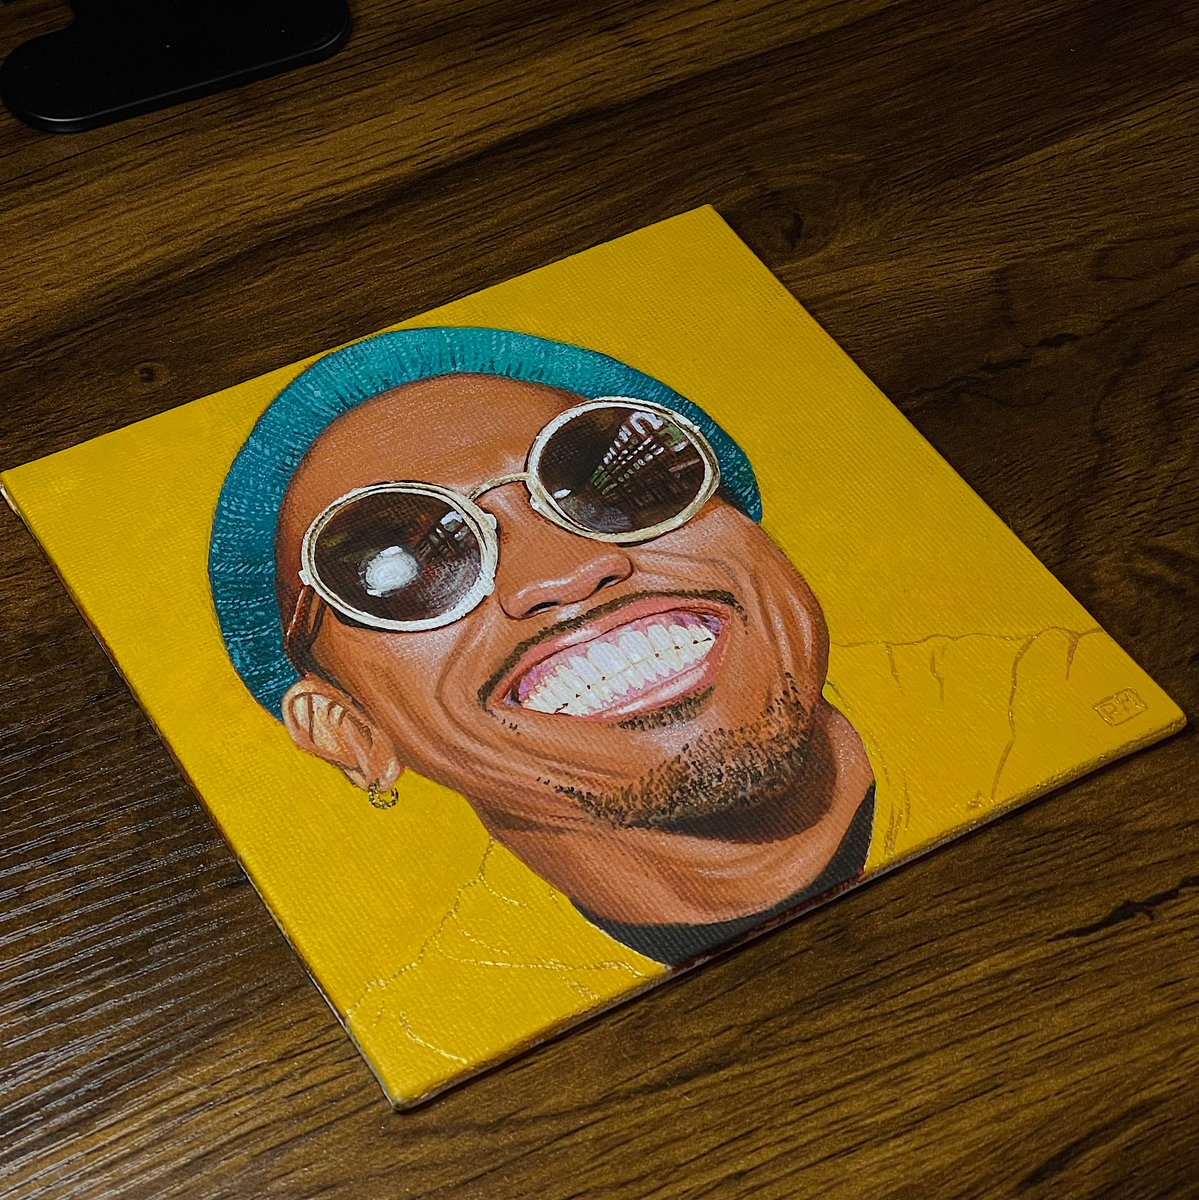 ‘Anderson Paak’
In need of a home
6x6 acrylic on canvas board
#painting #art #acrylicpainting #andersonpaak